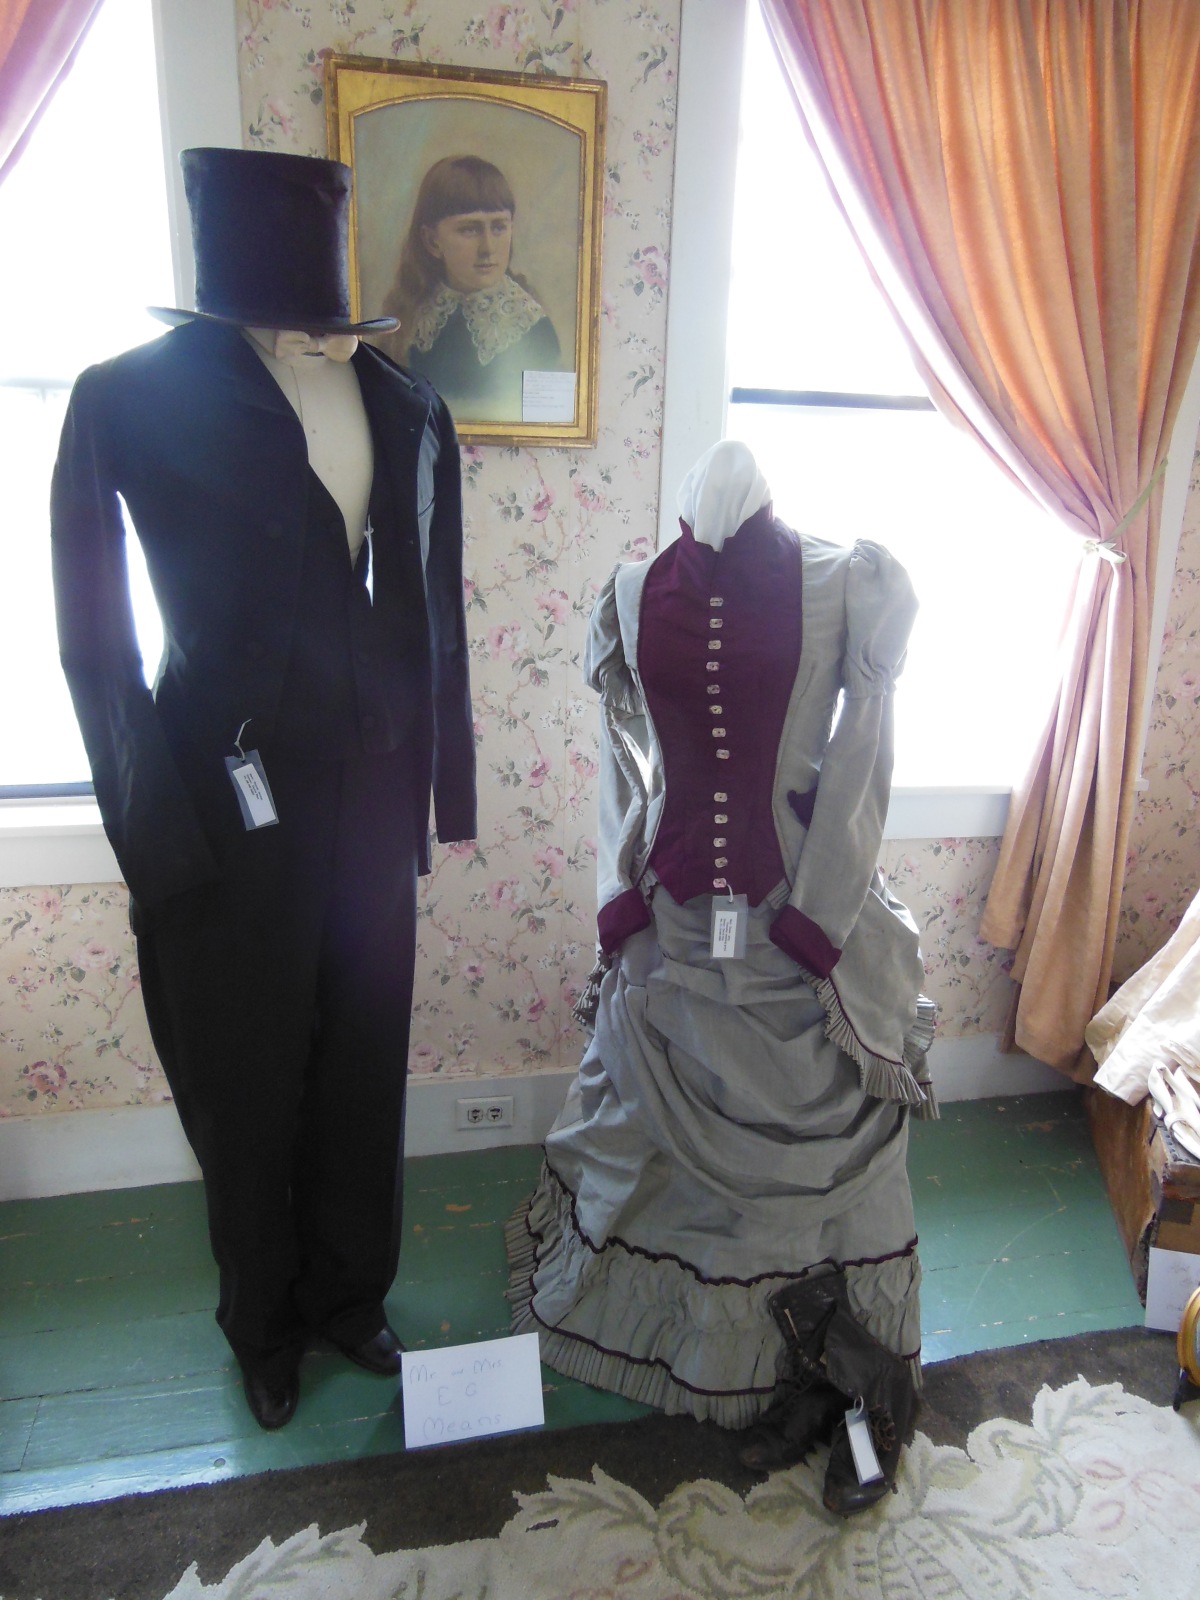 The Wedding Clothes of my Great Grandparents, William and Nellie Means